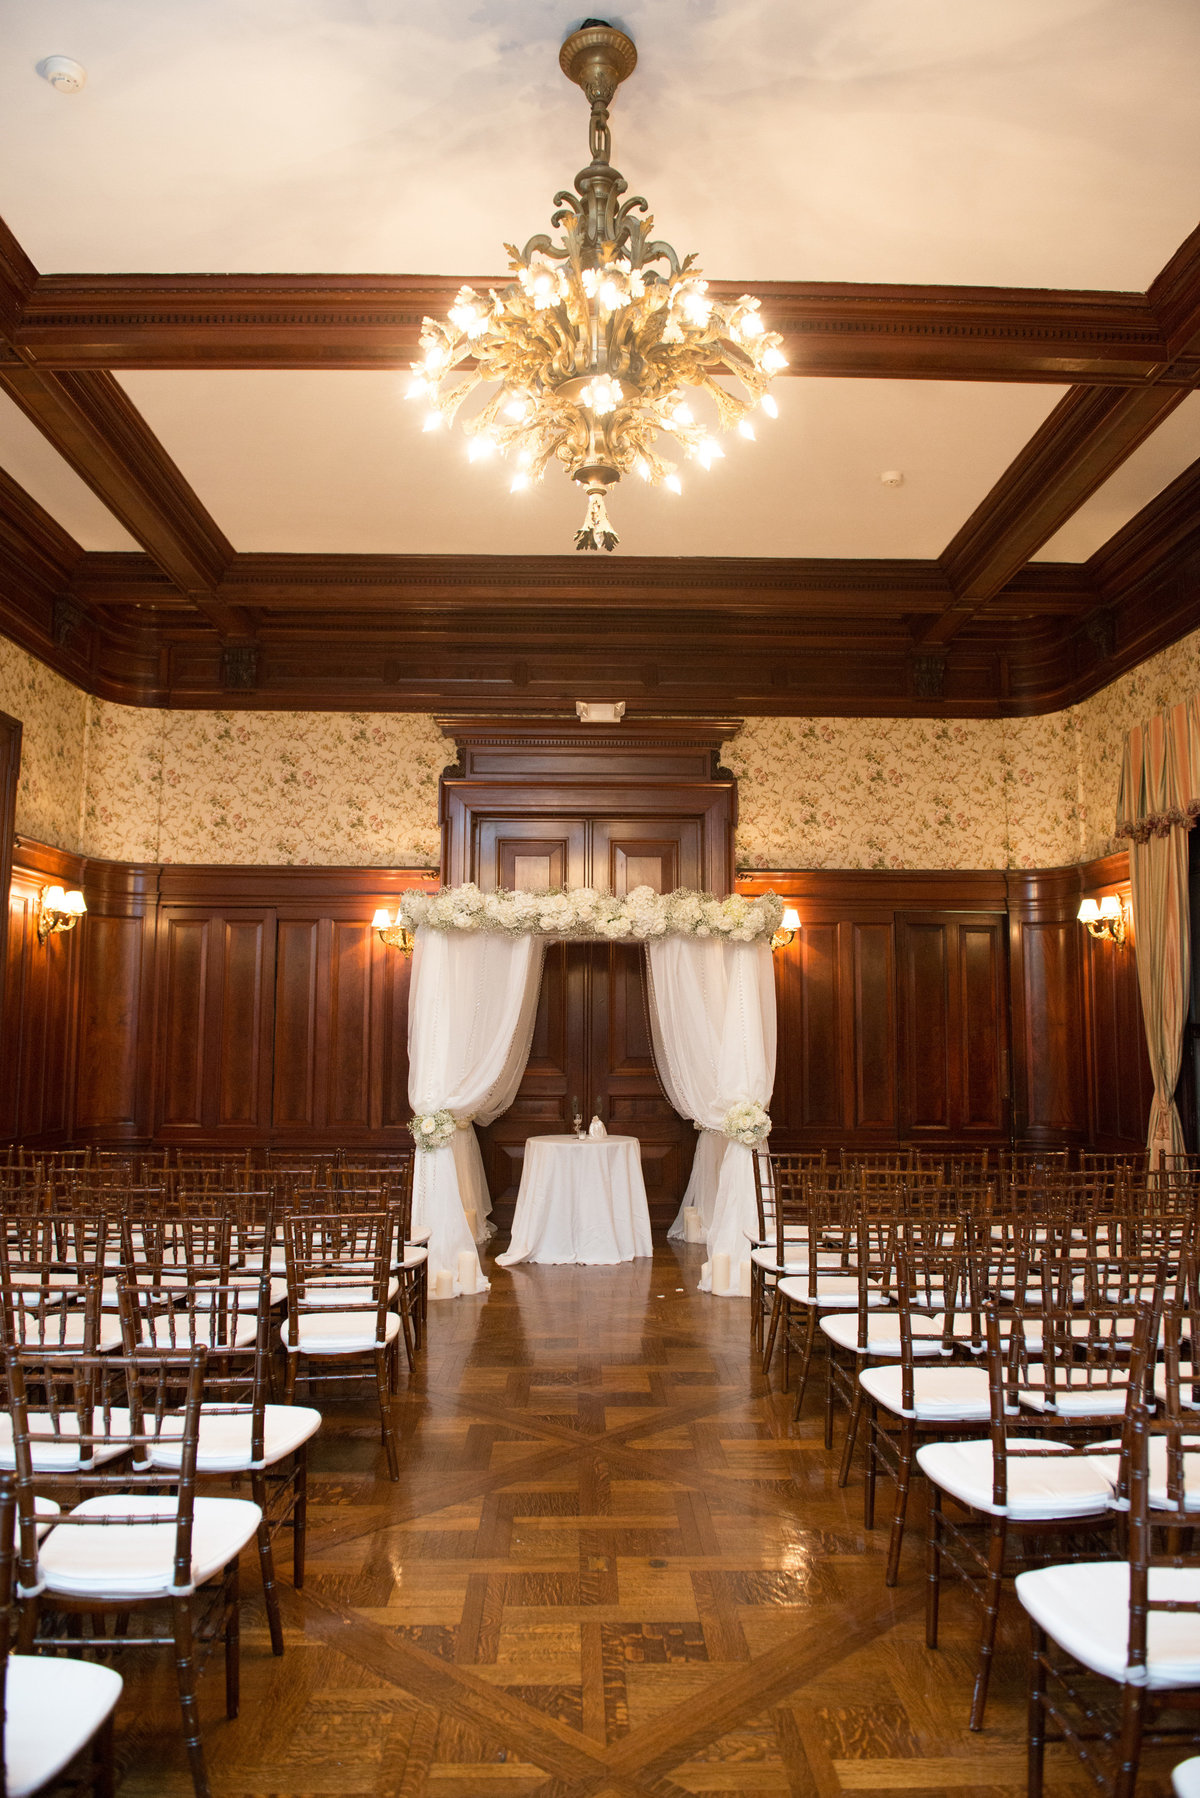 The in-door room for wedding ceremonies at The Bourne Mansion